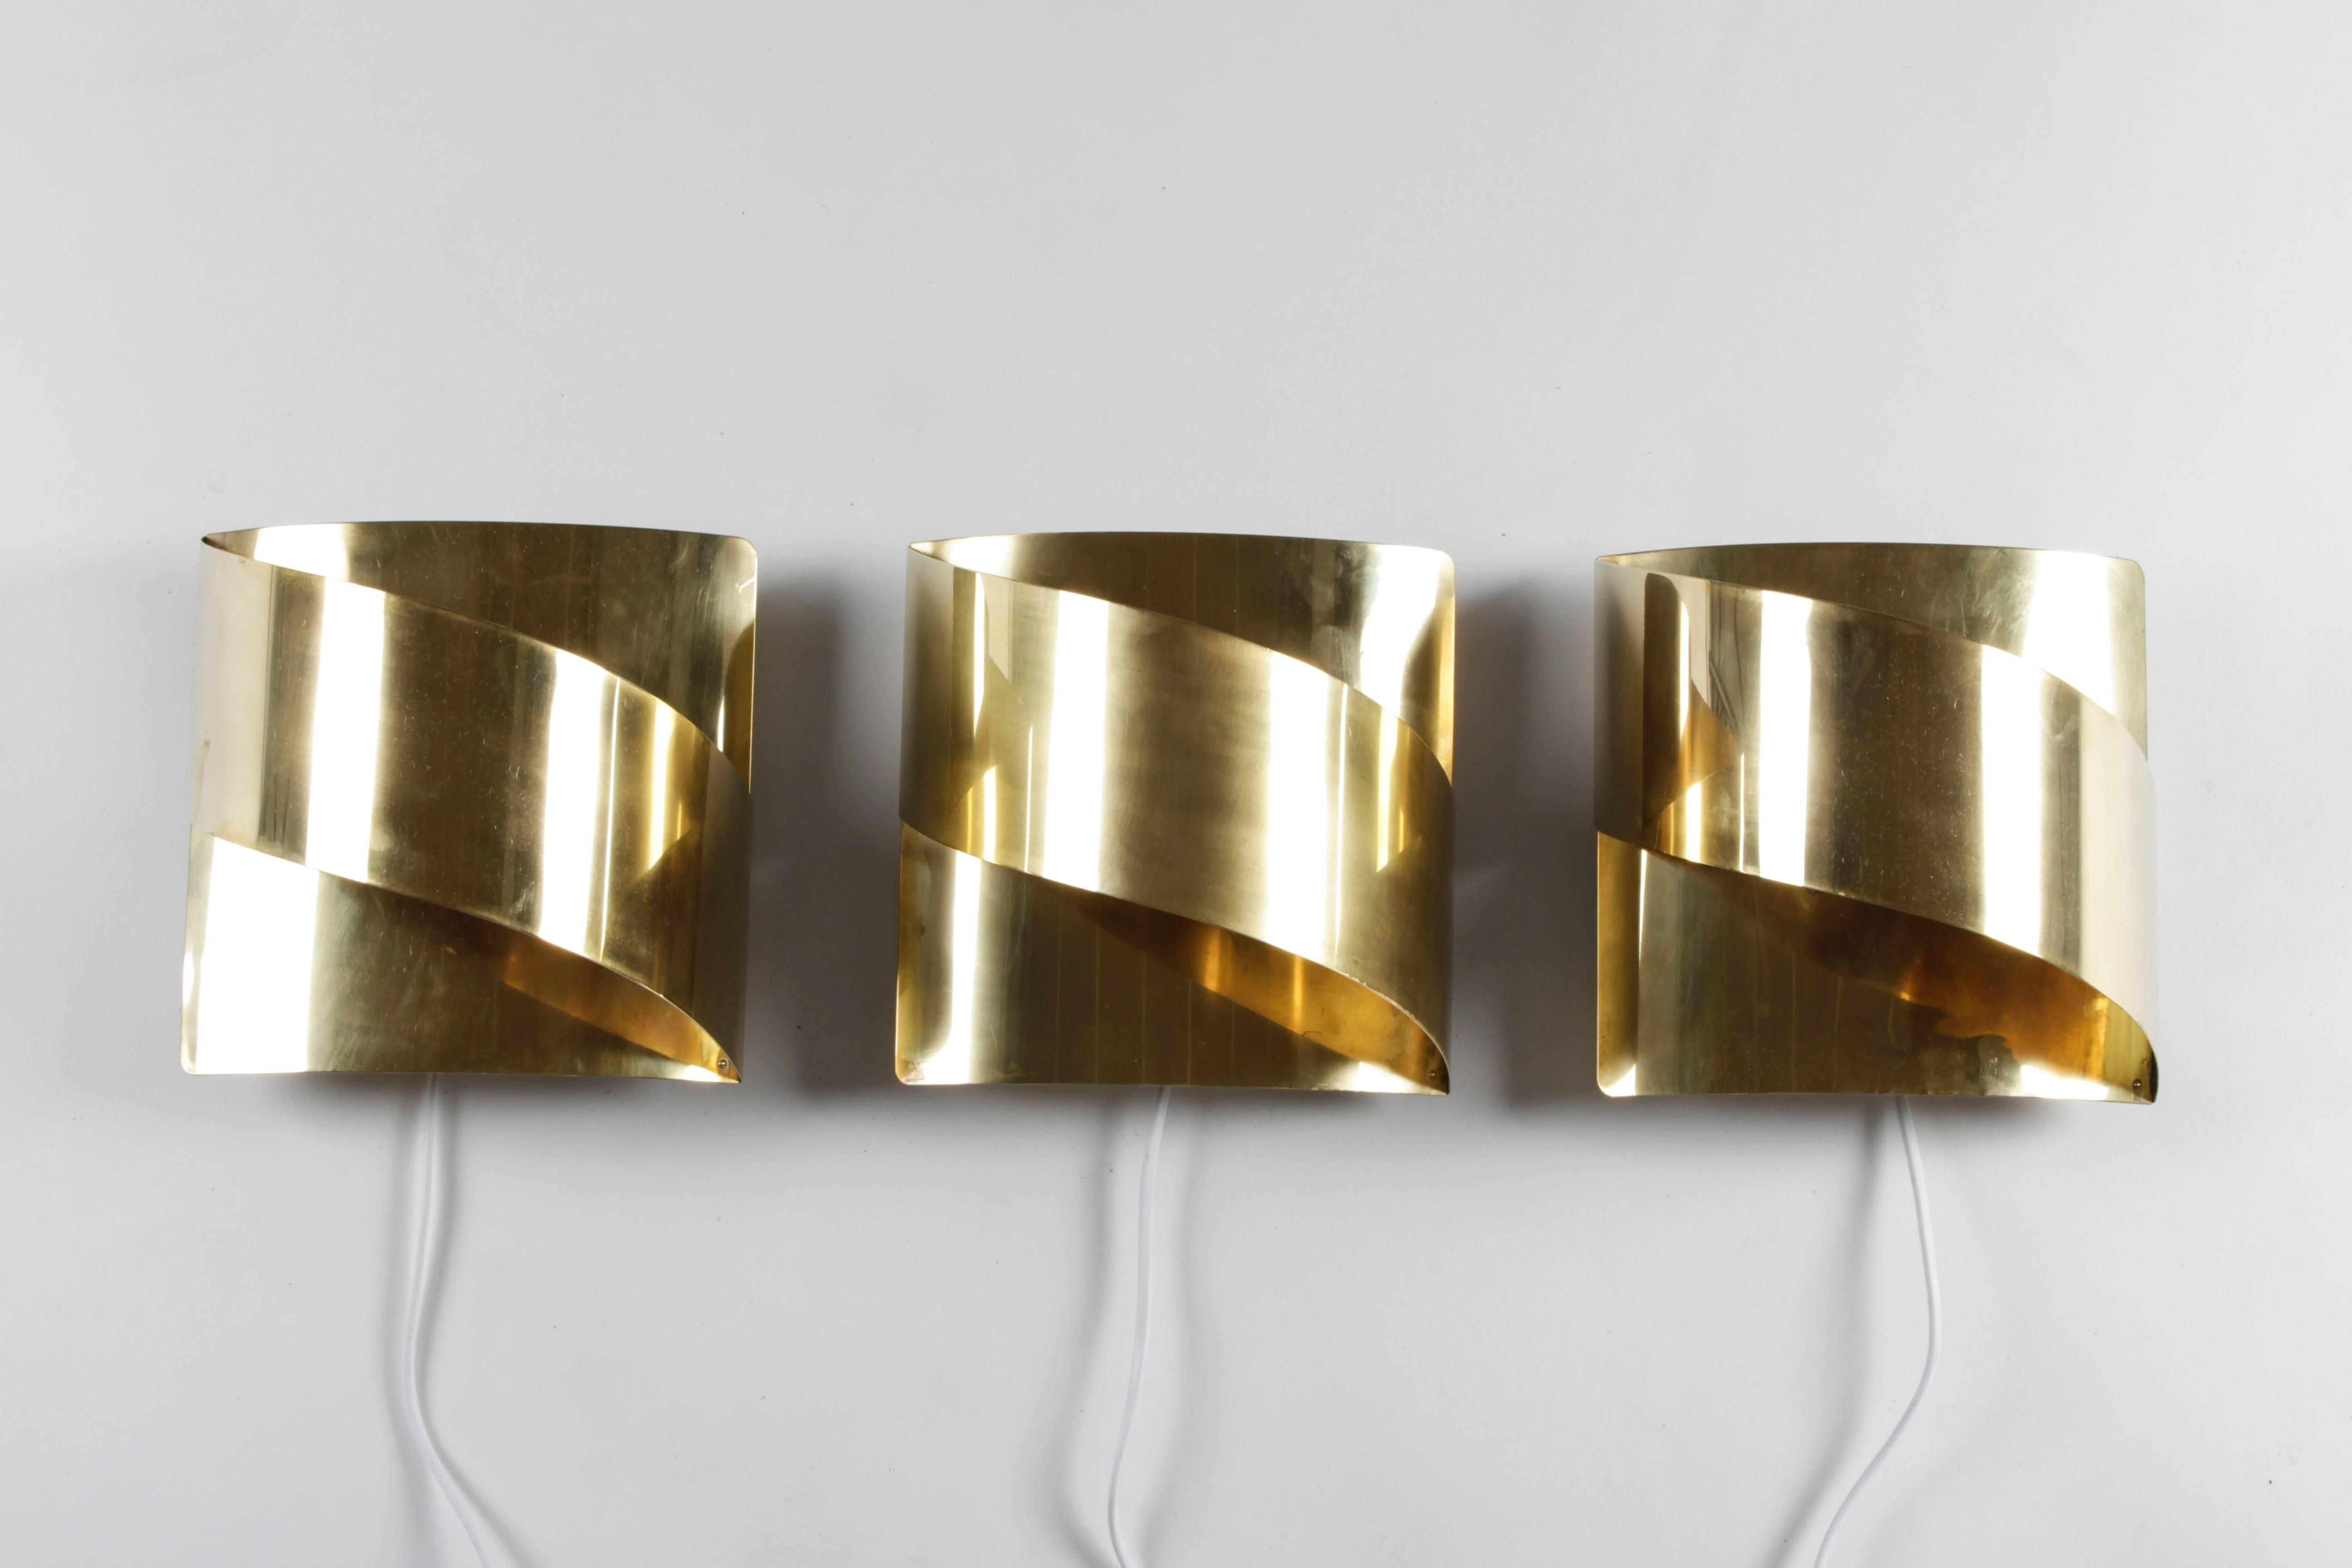 Set of three sconces by Falkenbergs Belysning, Sweden, 1970s.
The lamps feature a porcelain E 27 socket which is mounted on the wall. The brass frame is then fitted on the socket.
The lamps are in good condition with new wiring. The lacquer has